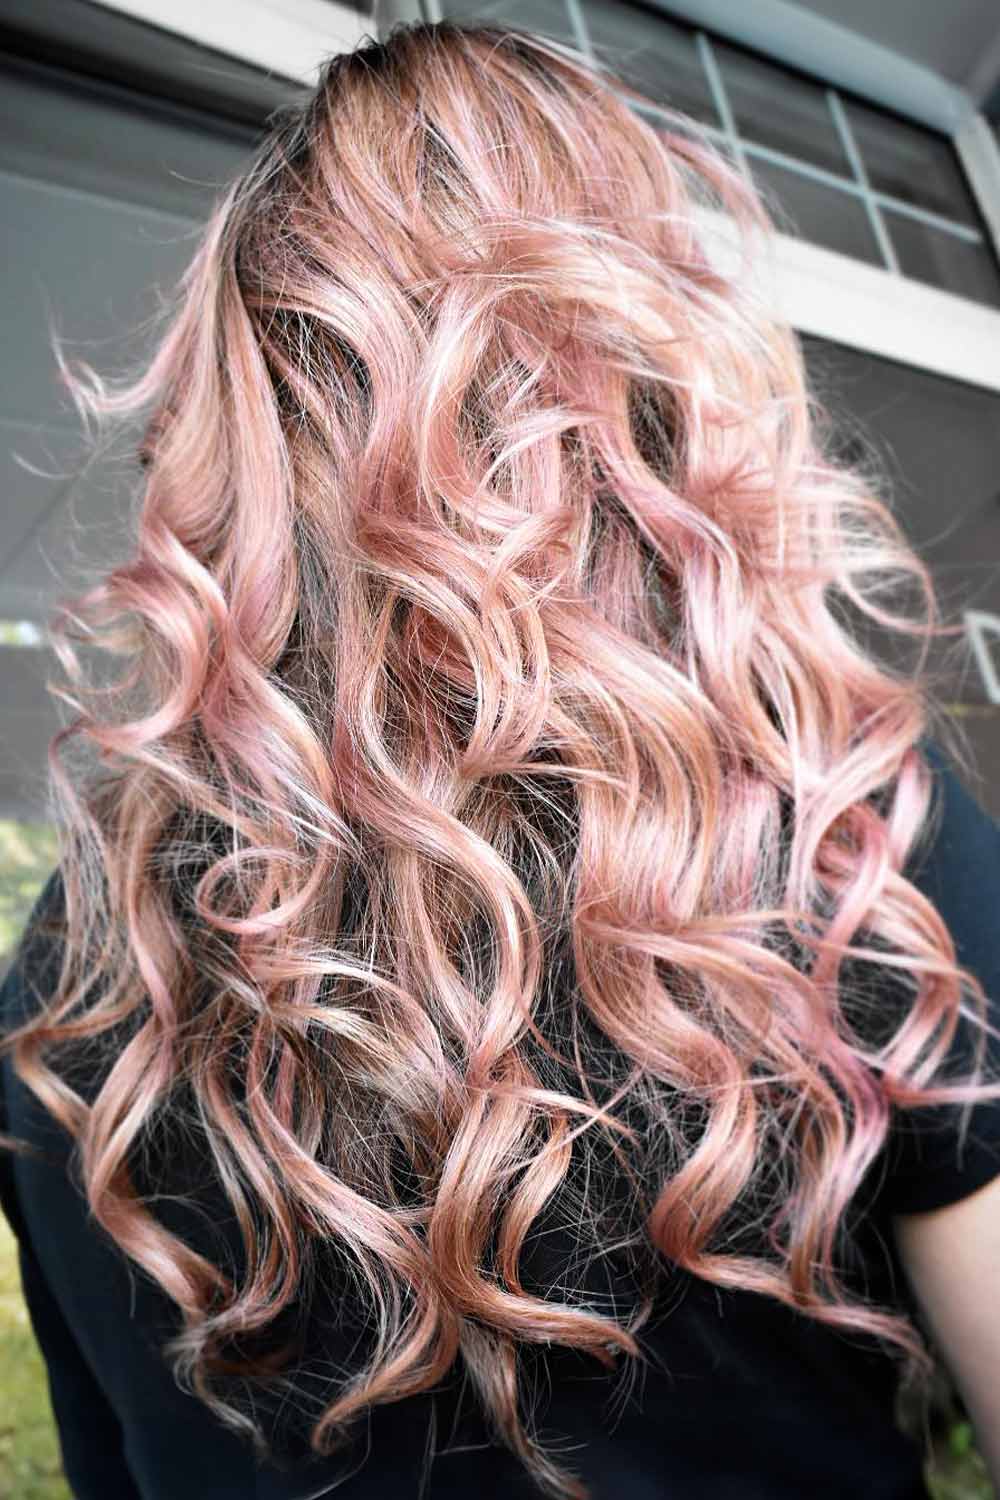 Cute Dirty Strawberry Blonde Hairstyles #dirtyblondehair #dirtyblonde #blondehair #blonde